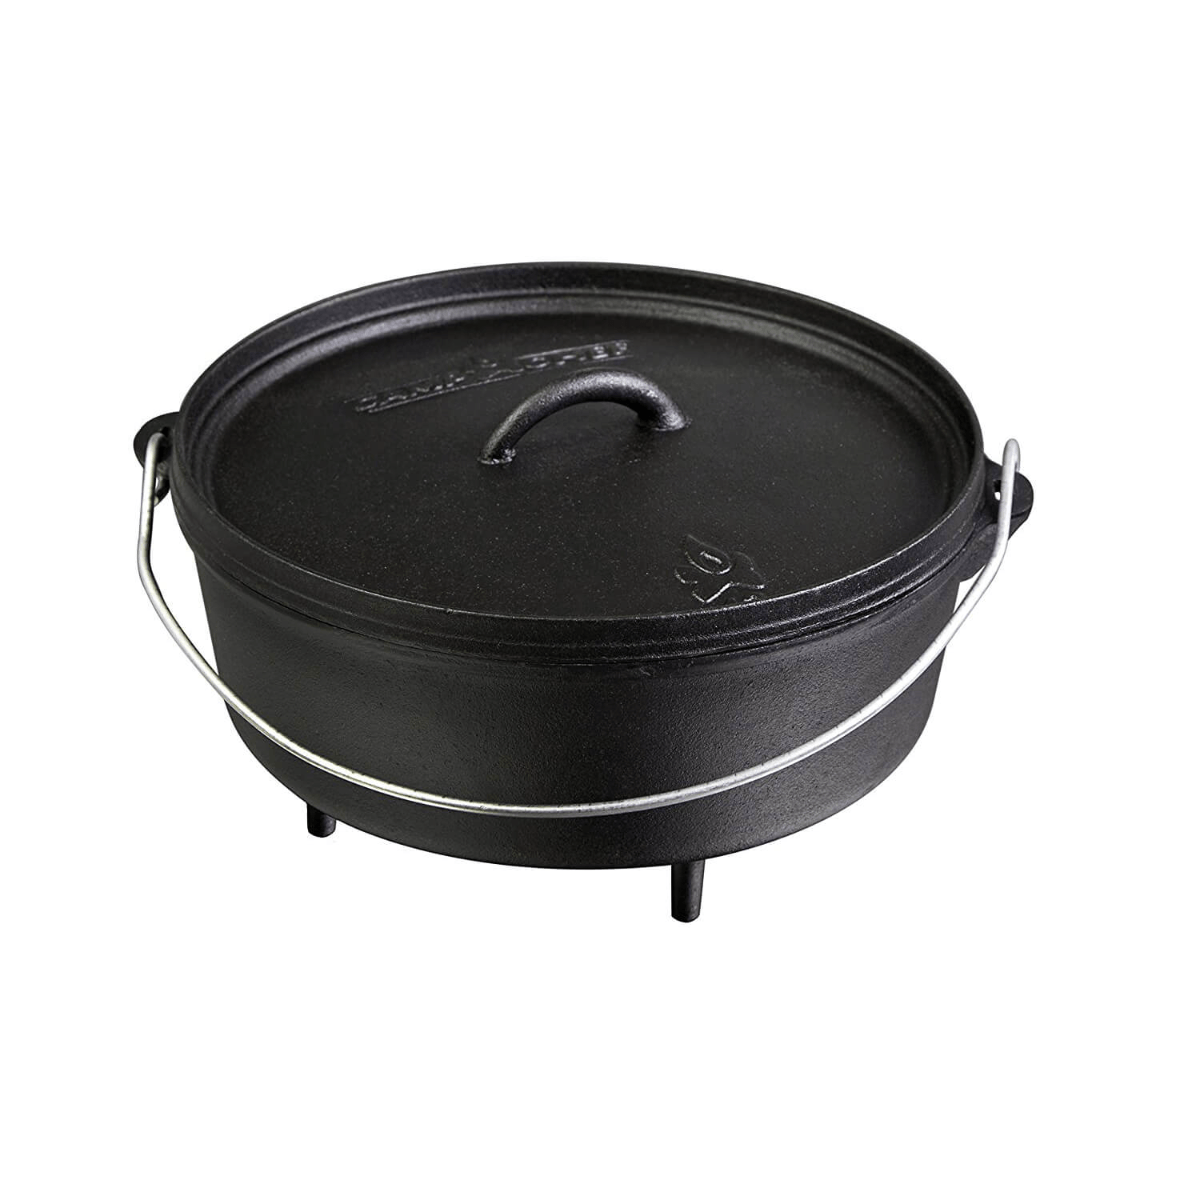 Classic Dutch Oven 4 Quart Cast Iron Loop Handle On Lid Cooking Camping  Outdoor